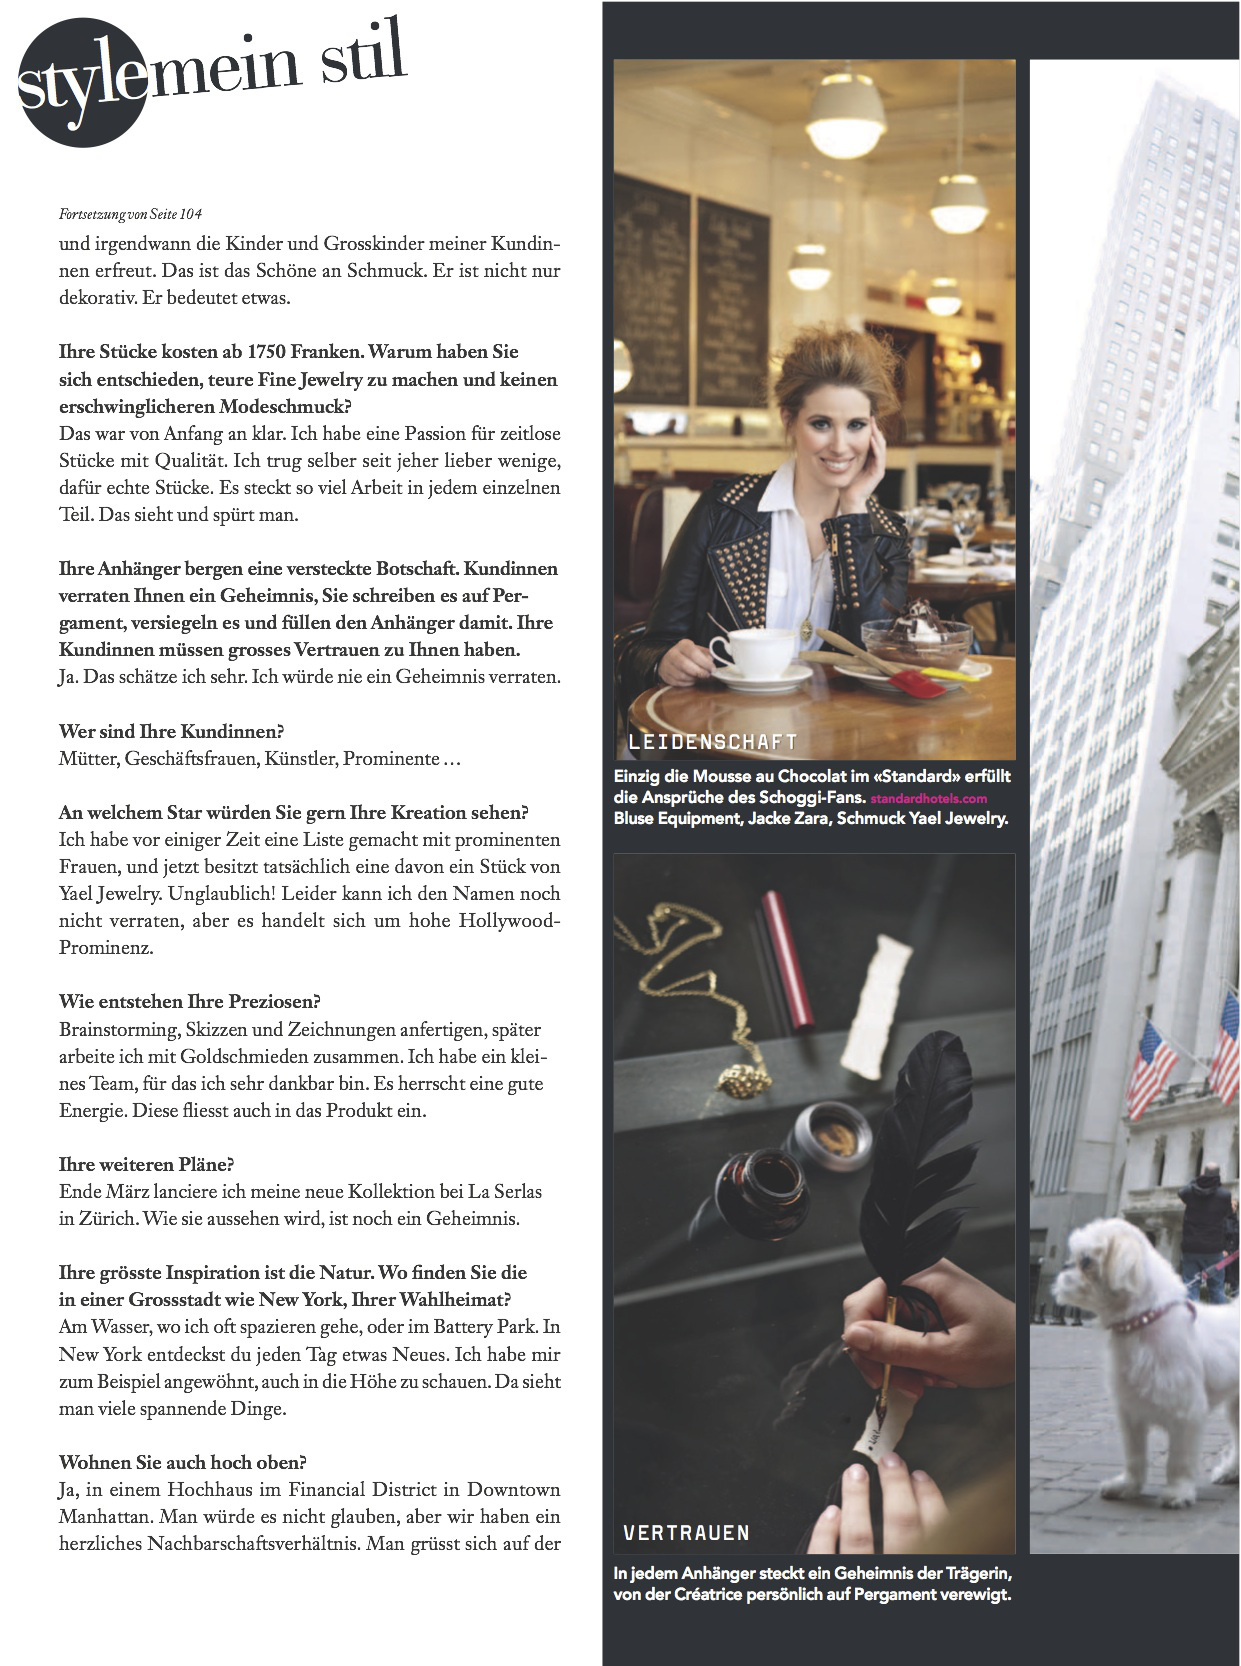 si-style-page-3.jpg